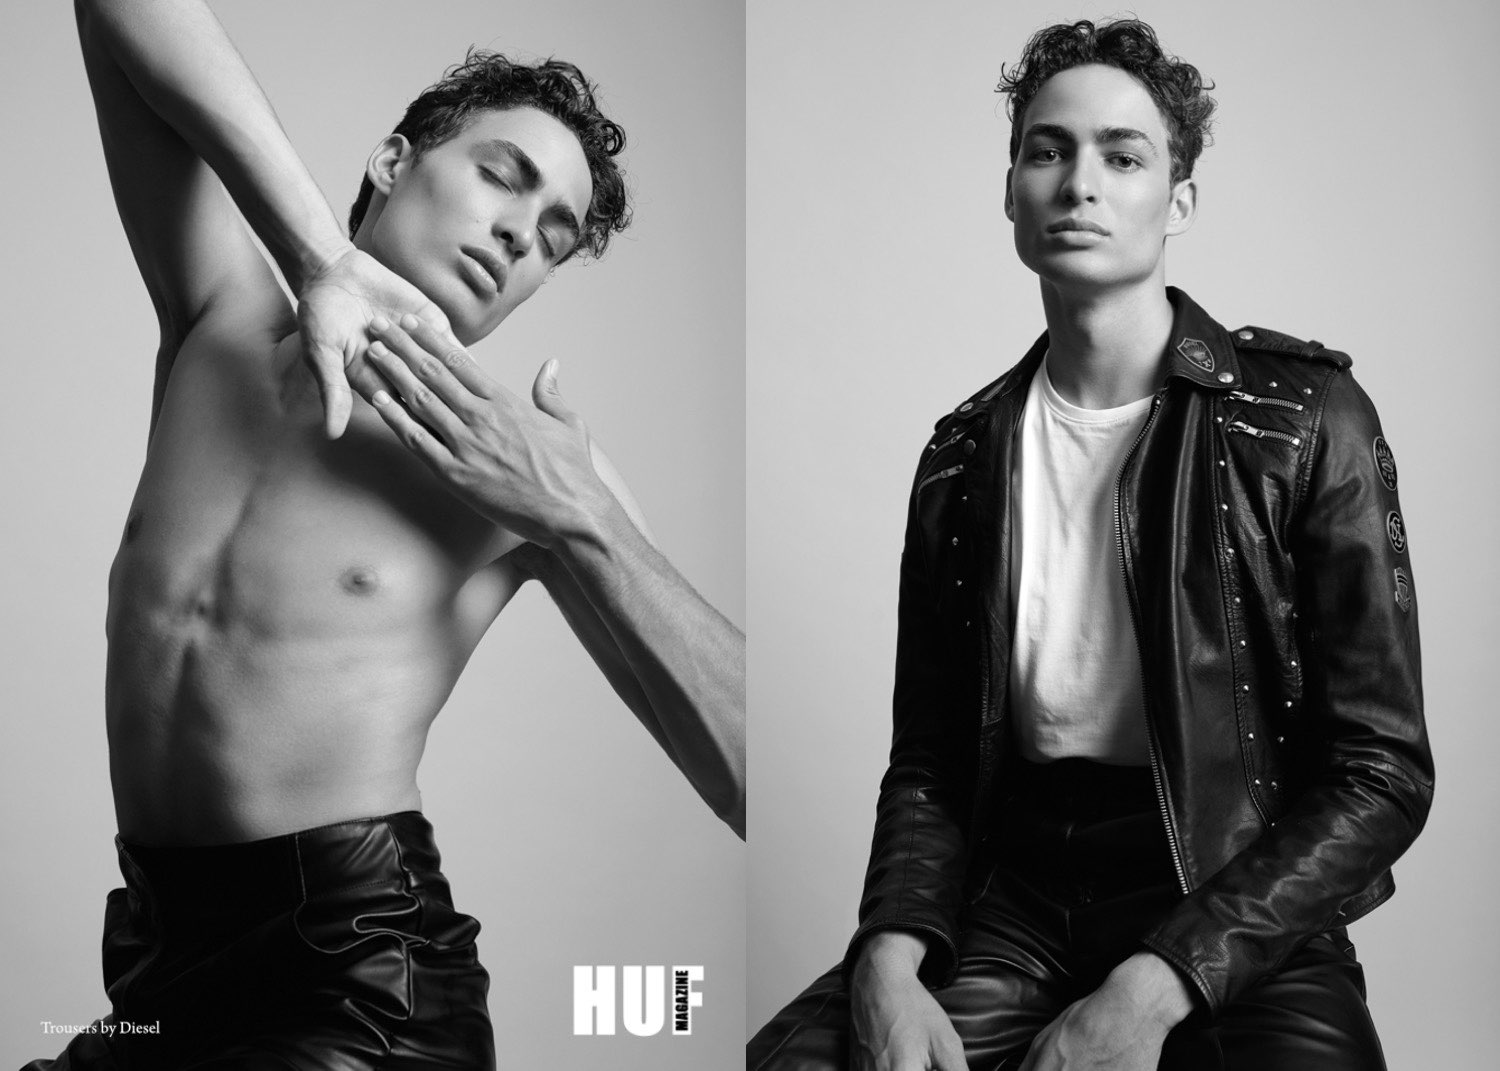 New work form Claire for the HUF magazin